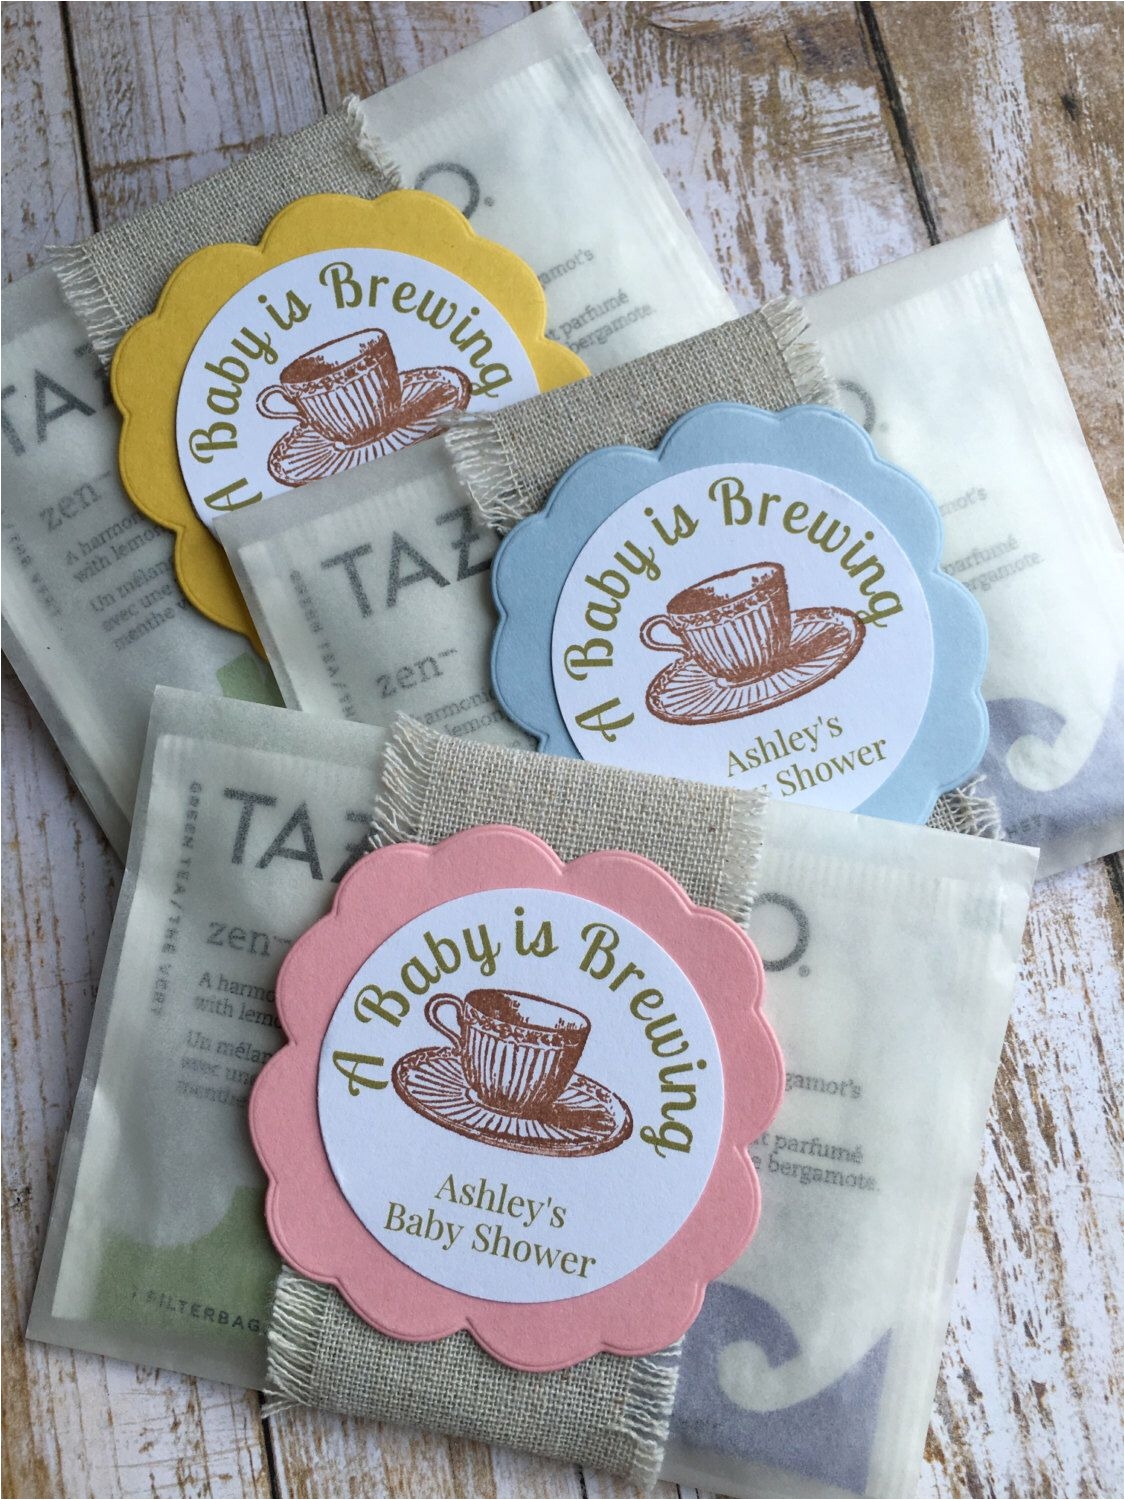 8 baby shower favors baby shower tea bag favors a baby is brewing favors glassine bags by kraftandpoppy on etsy